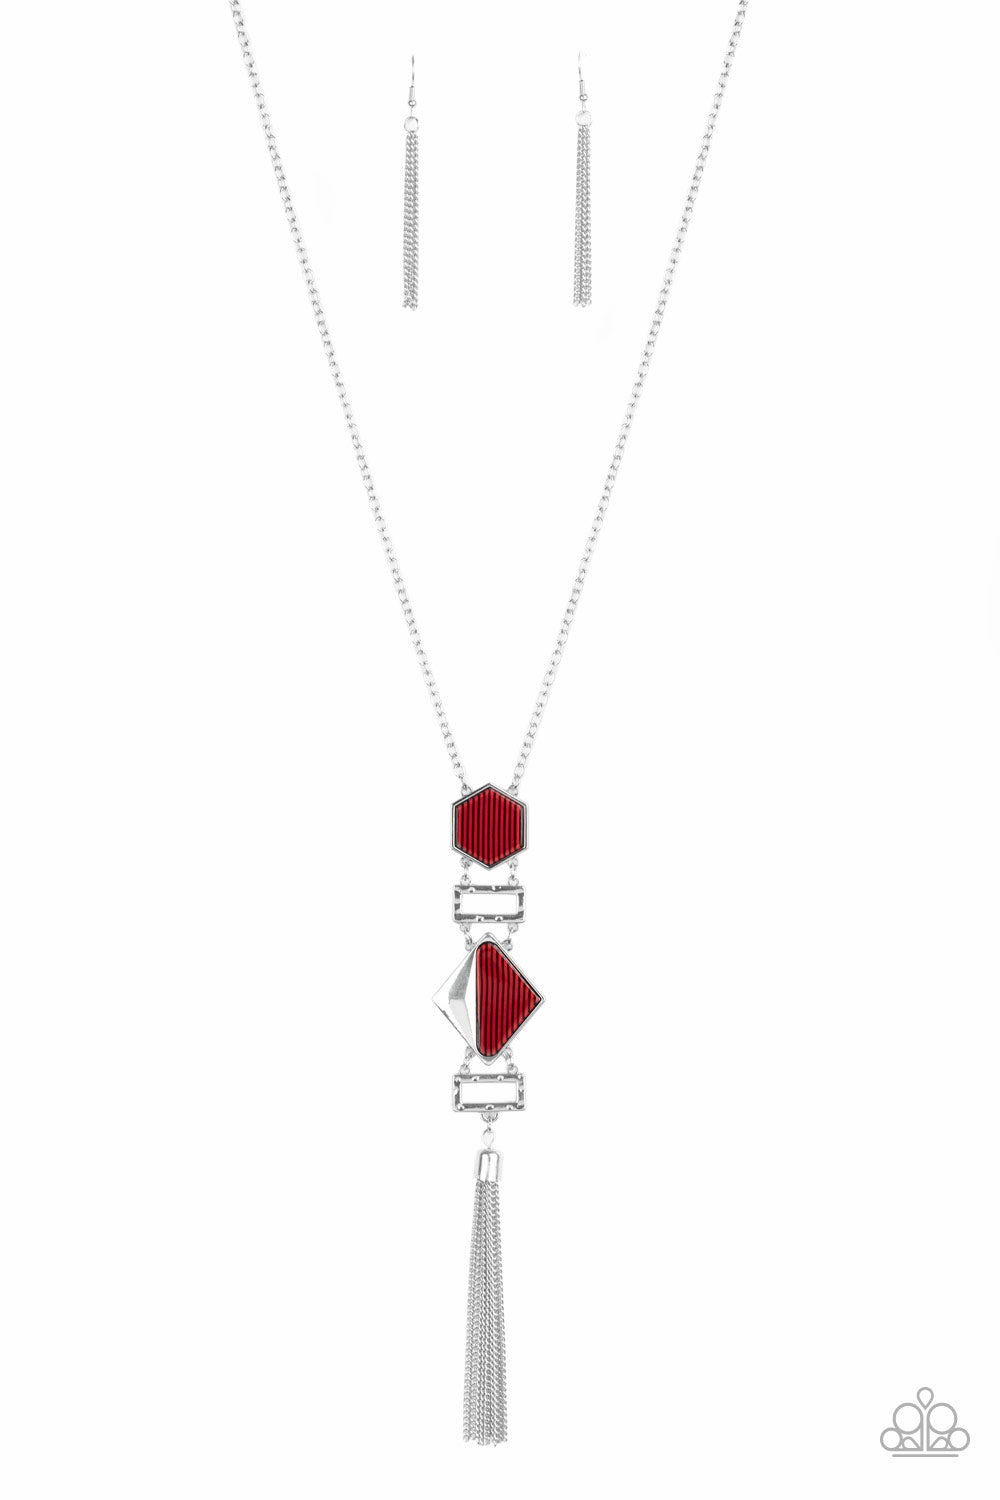 STRIPE Up a Conversation - red - Paparazzi necklace